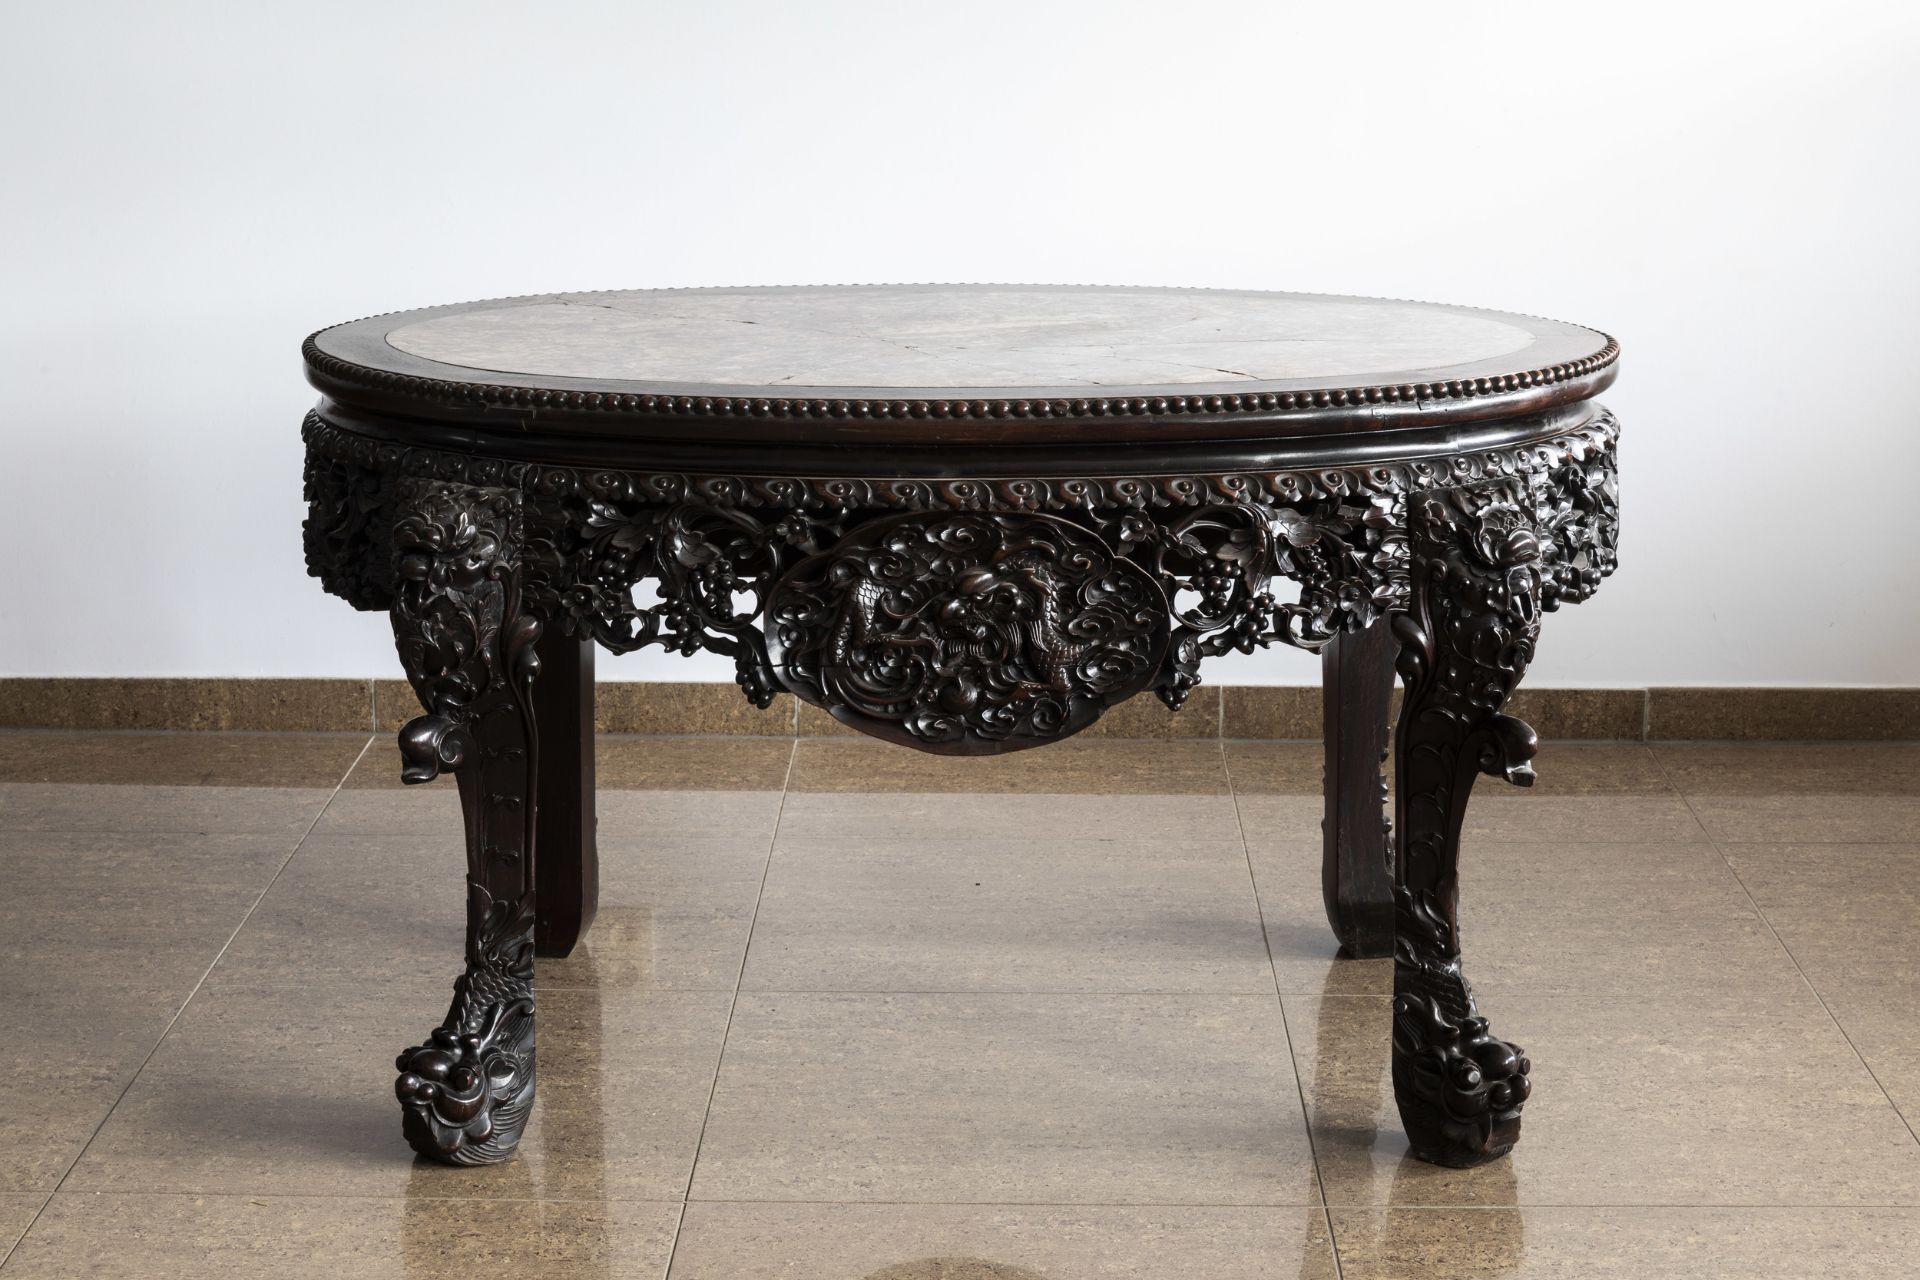 An oval Chinese finely carved wooden table with marble top, 19th C. - Image 2 of 6